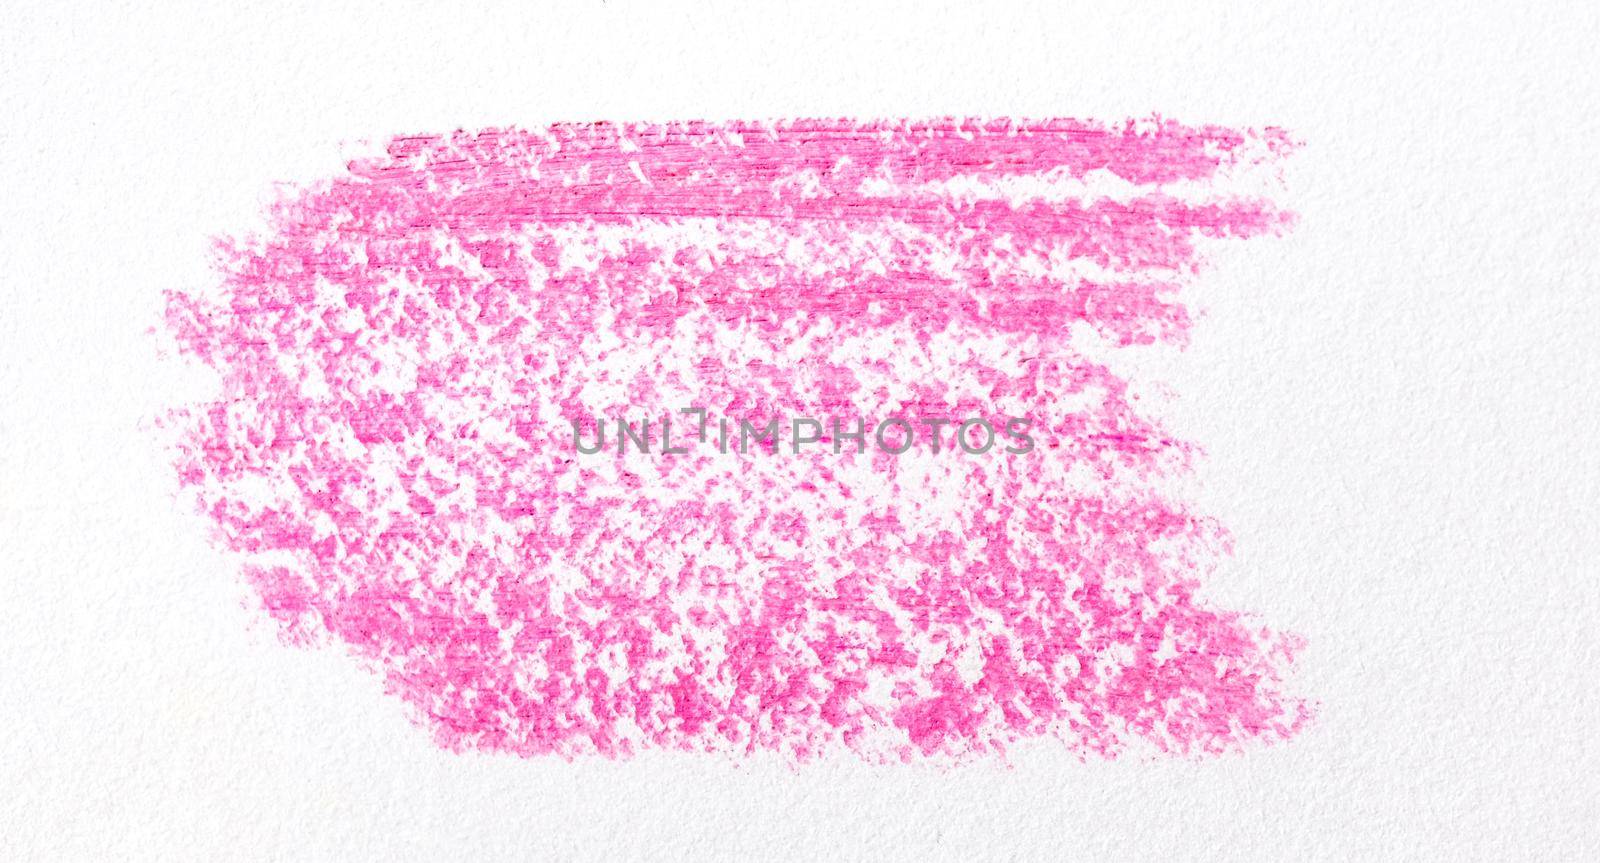 Pink cosmetic pencil smear on white background